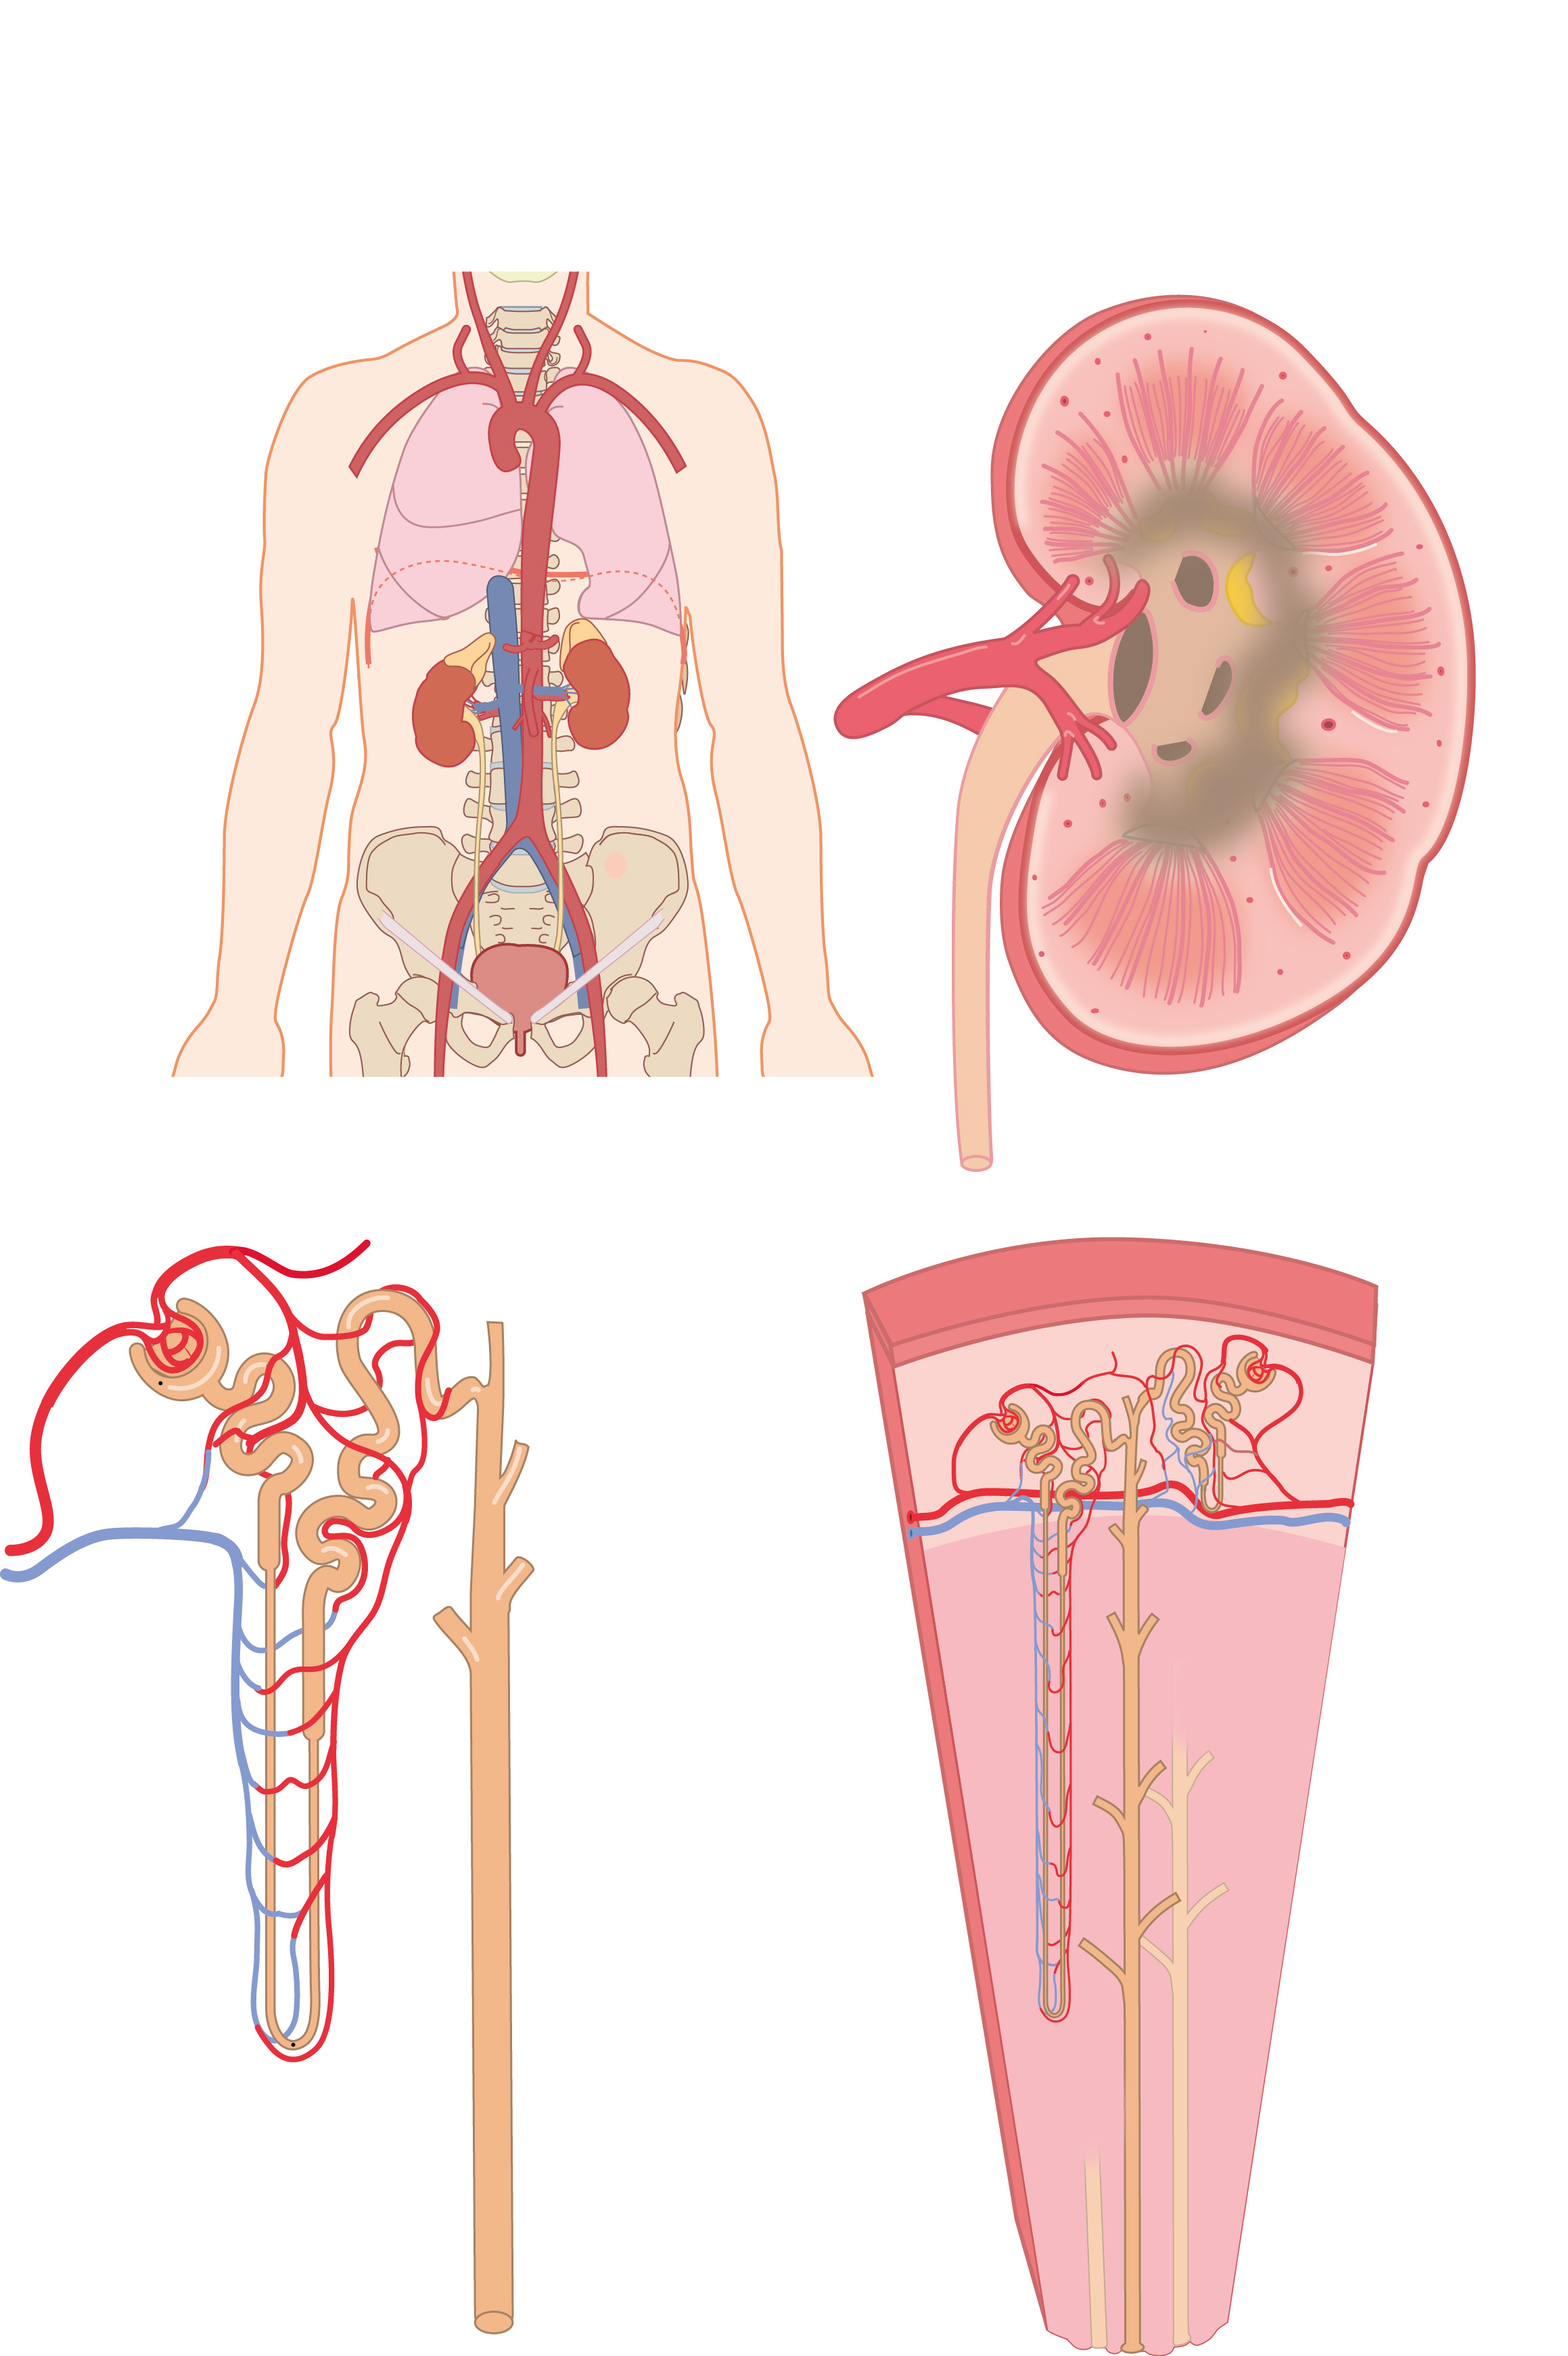 Front-view of a normal urinary tract with kidneys, ureters, bladder, and  urethra labeled - Media Asset - NIDDK